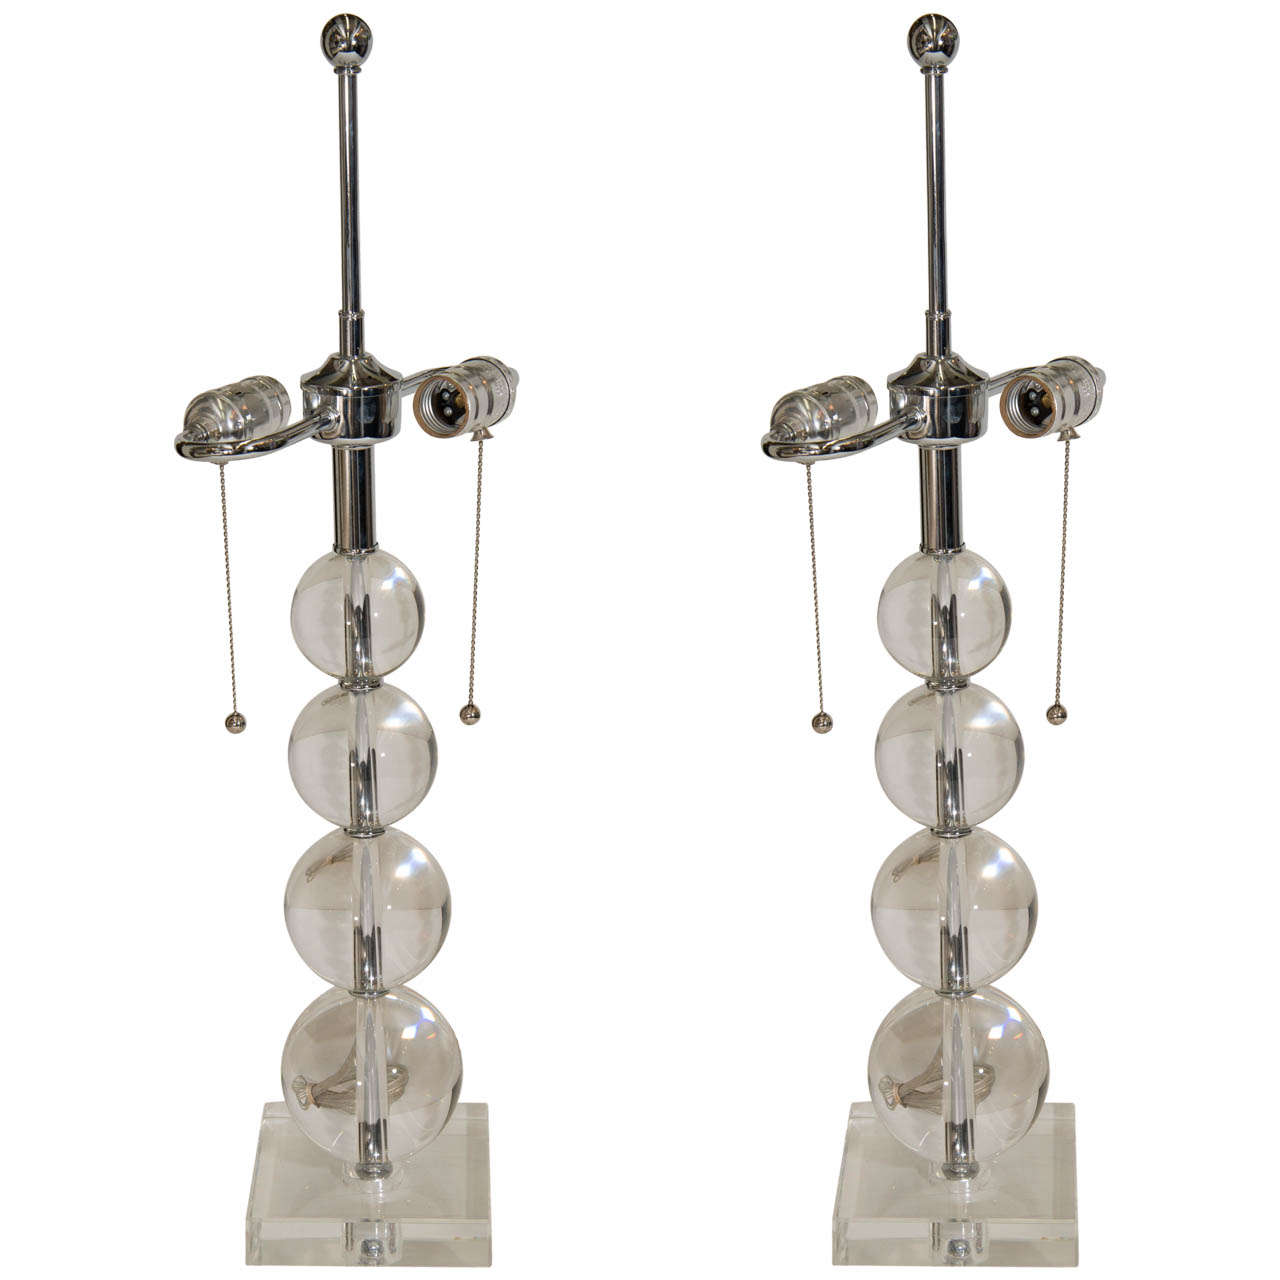 A Mid Century Pair of Glass and Chrome Ball Table Lamps